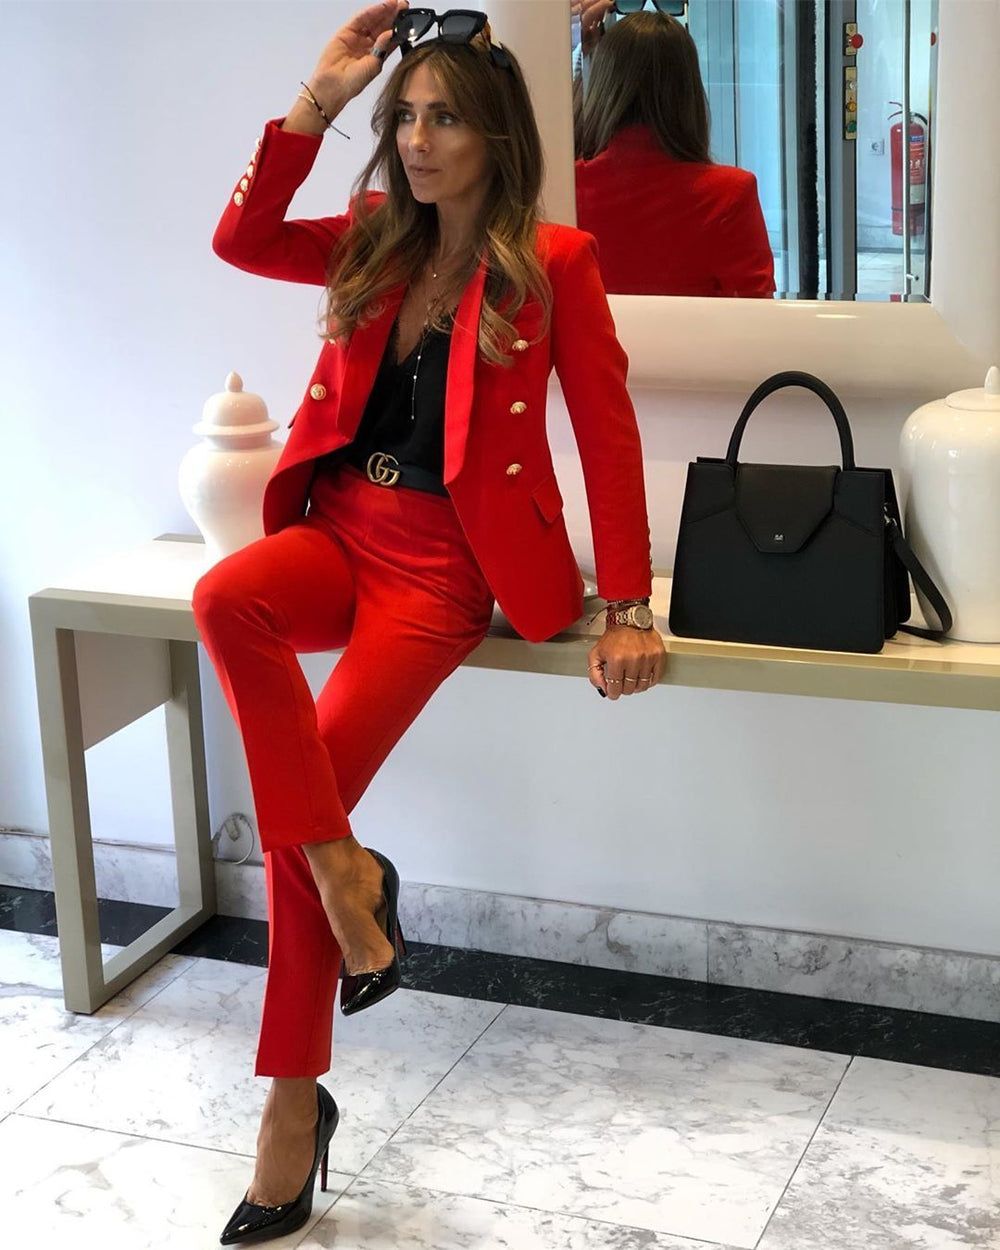 Sleek and Stylish: Elevate Your Look with Red Blazers